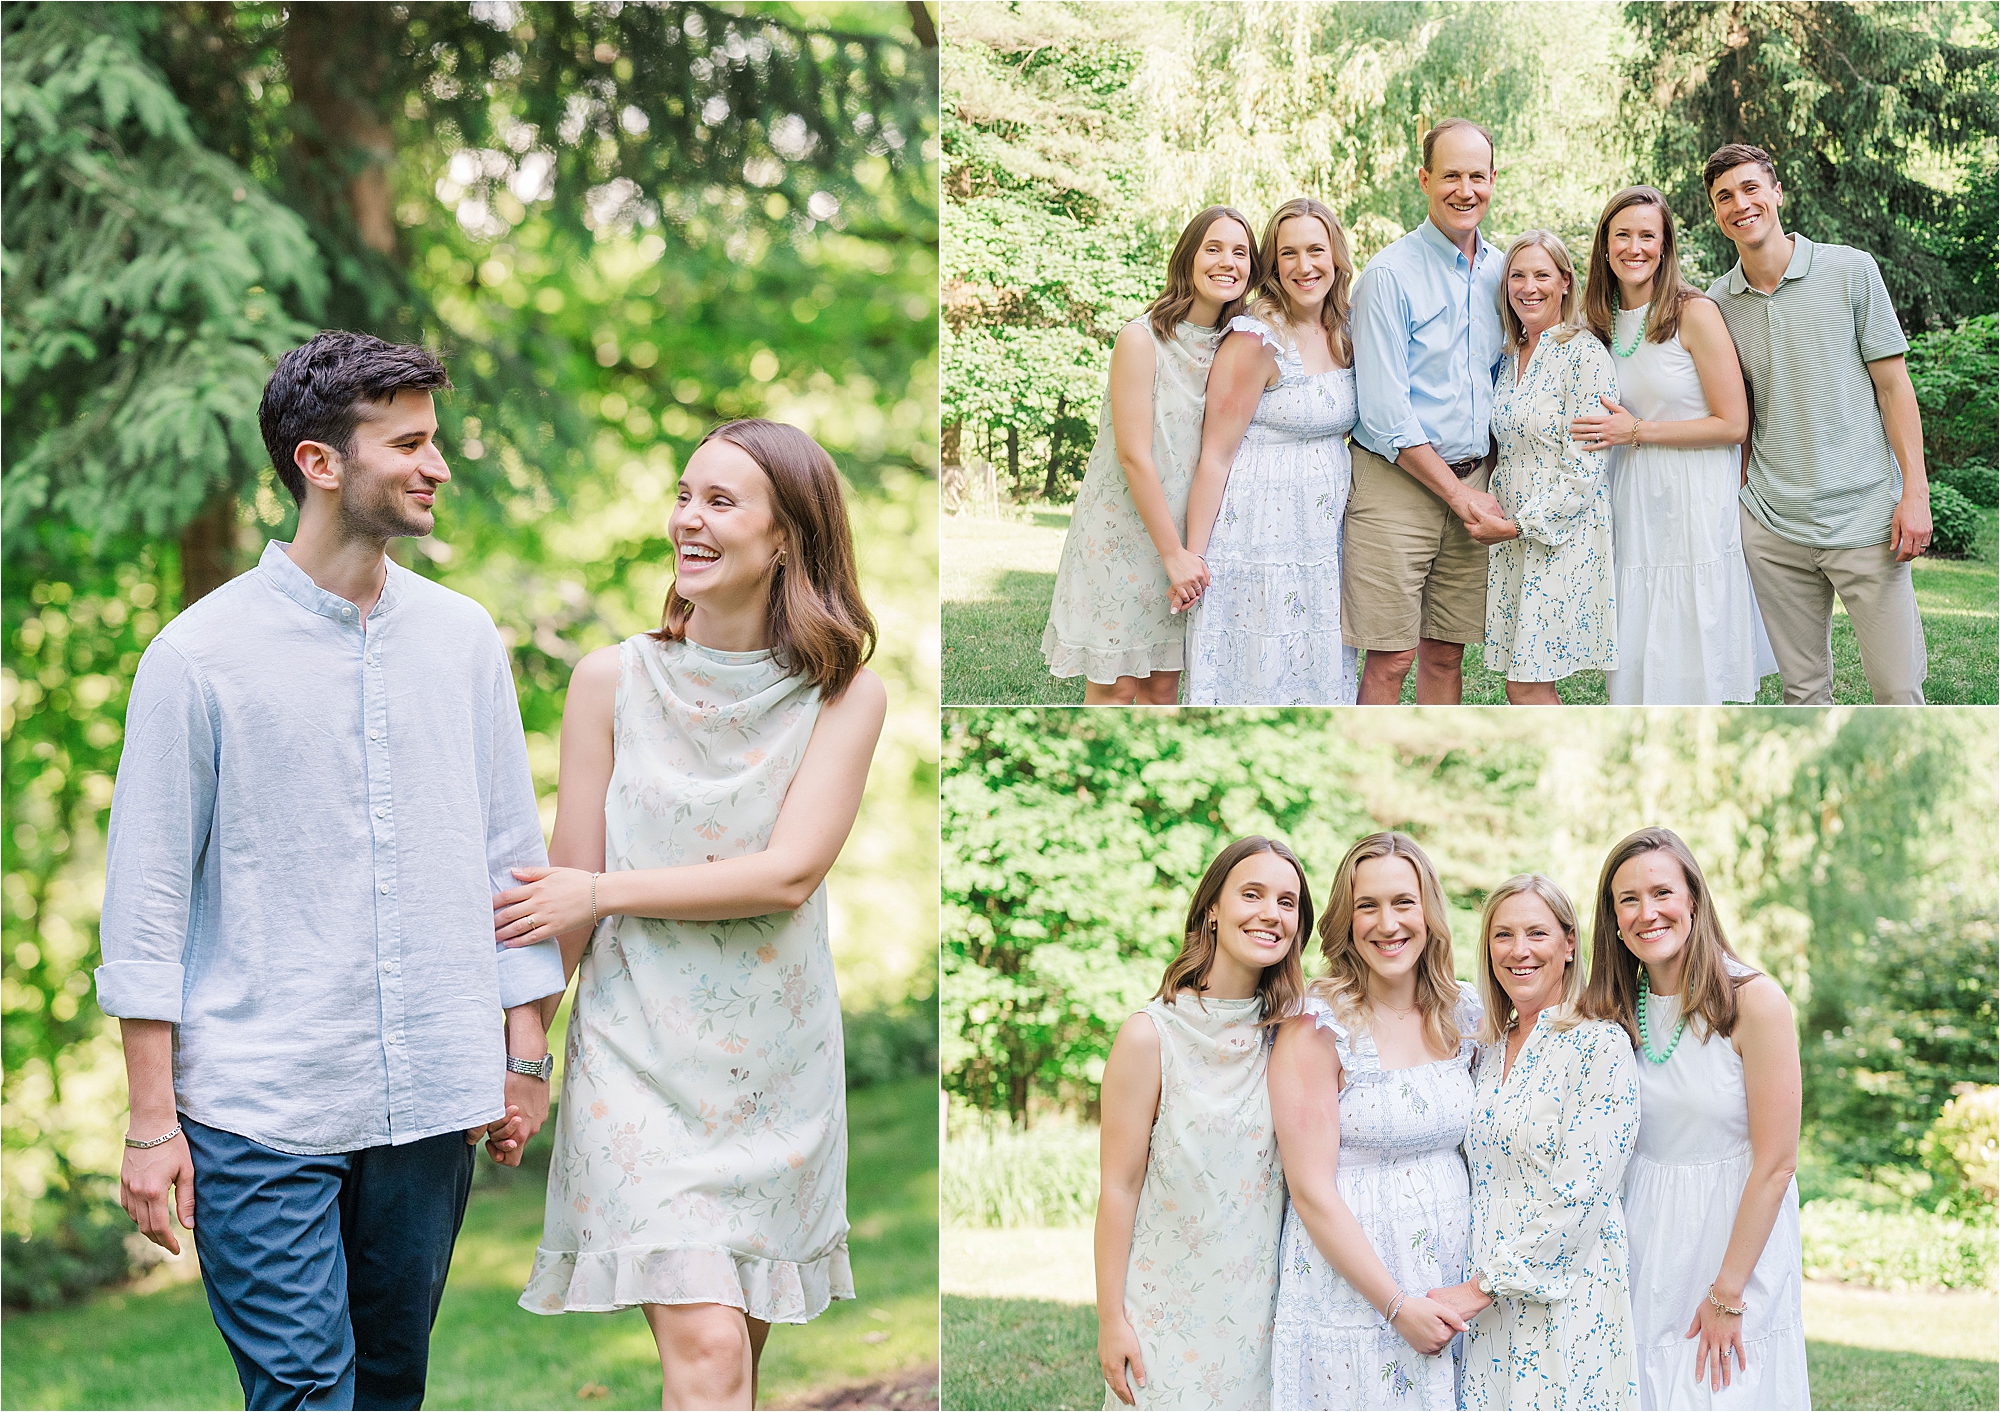 photographer to take photos of large family group • Generation Extended Family Photography Sessions